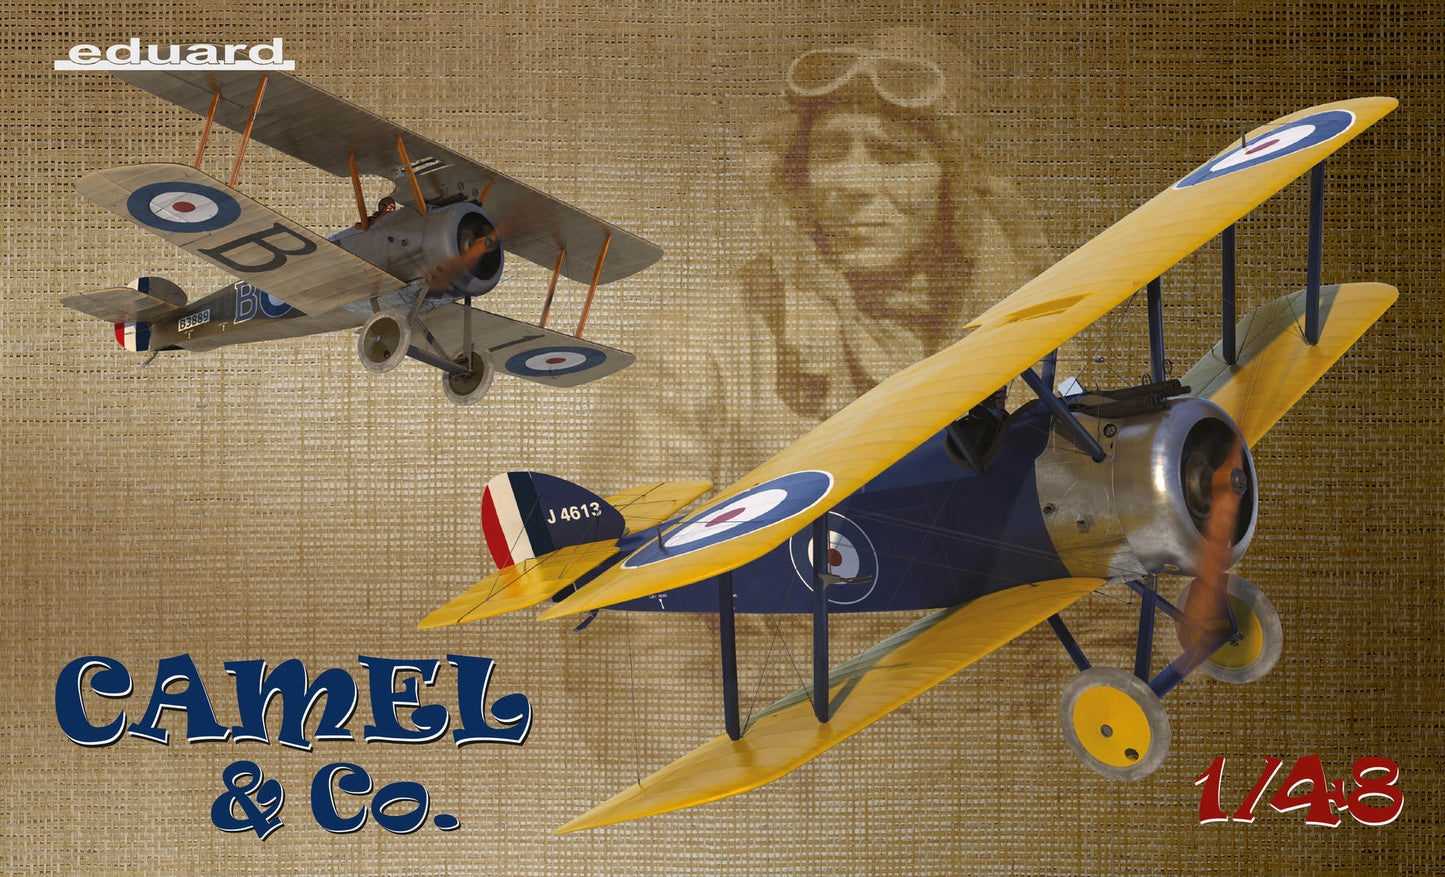 Sopwith Camel "& Co. Dual Combo" Limited edition - EDUARD 1/48